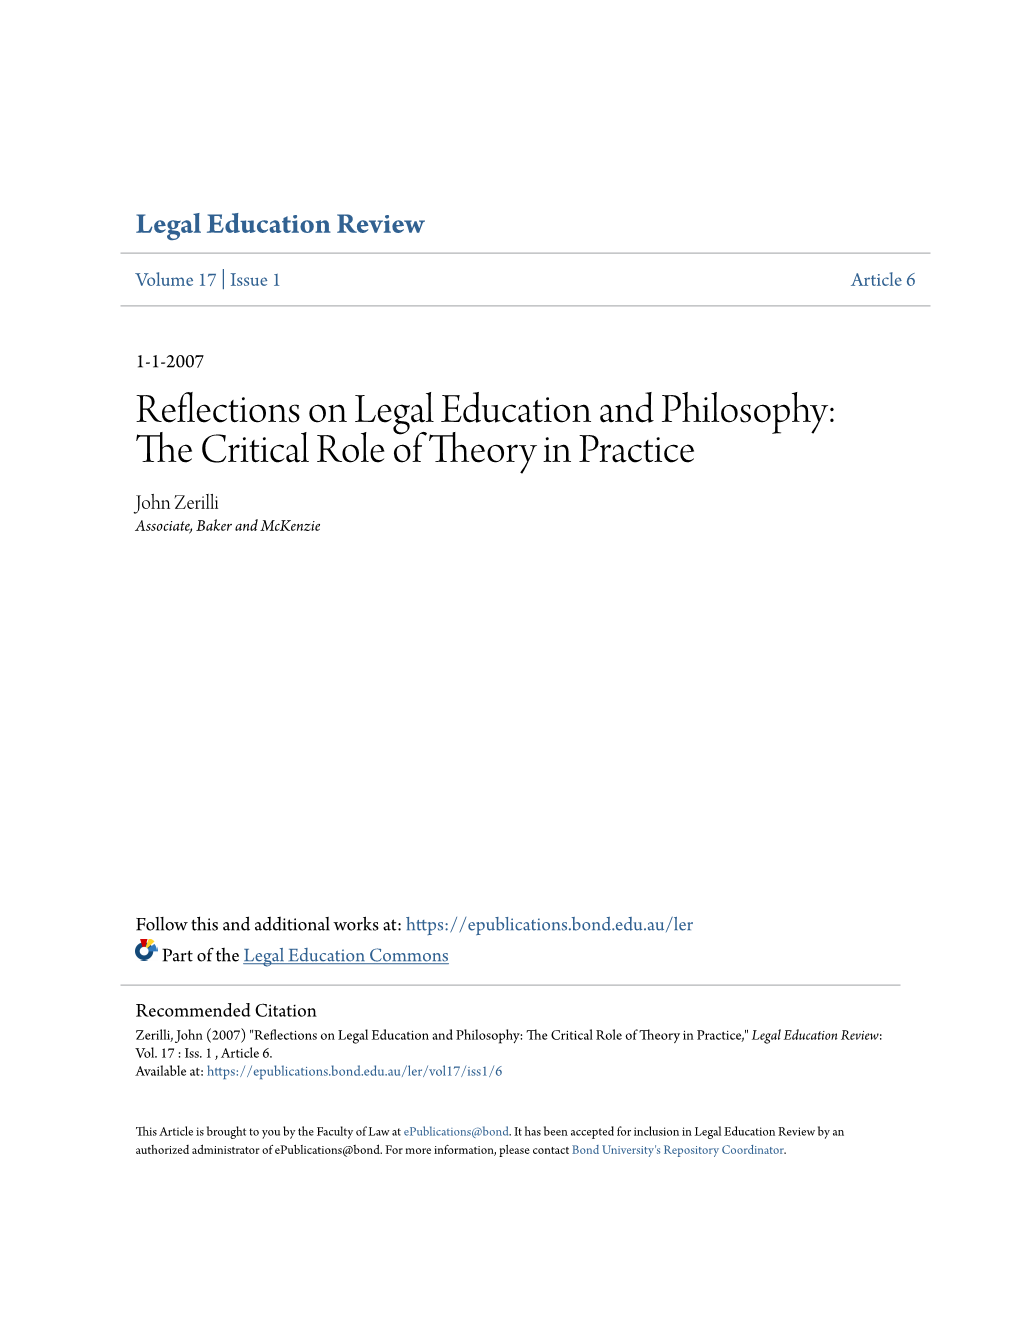 Reflections on Legal Education and Philosophy: the Critical Role of Theory in Practice